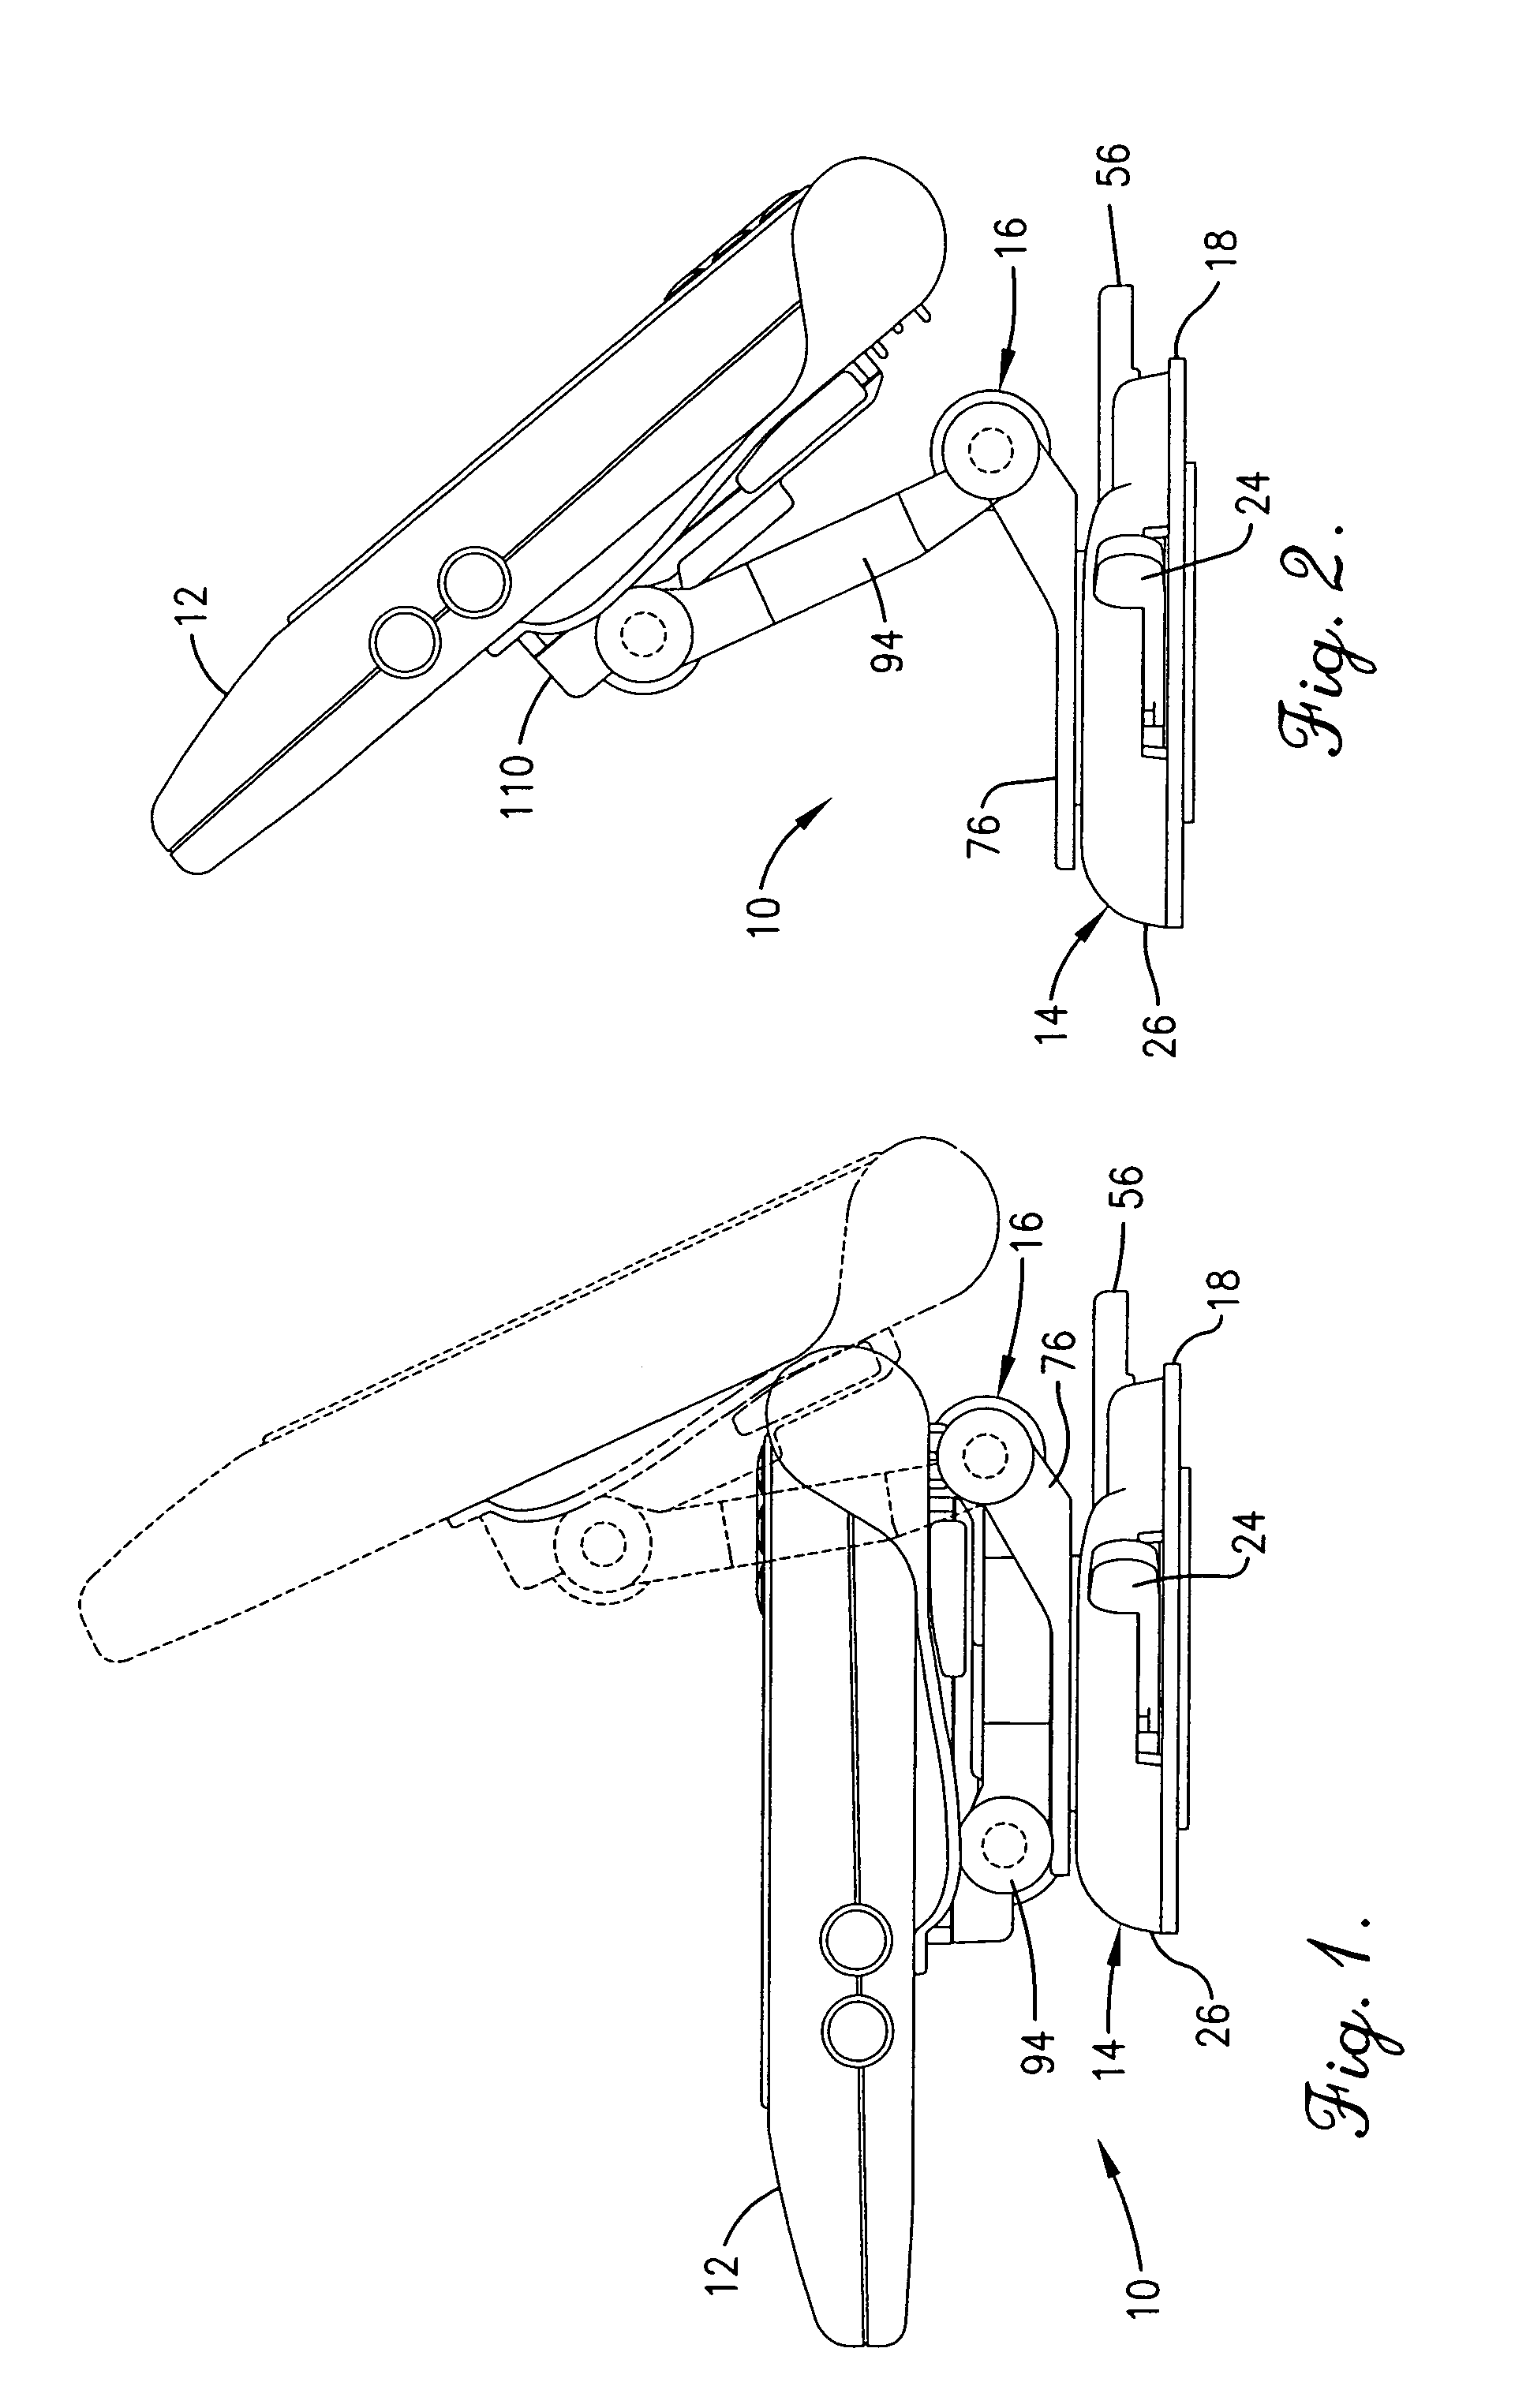 Multi-position articulating mounting apparatus for an electronic device